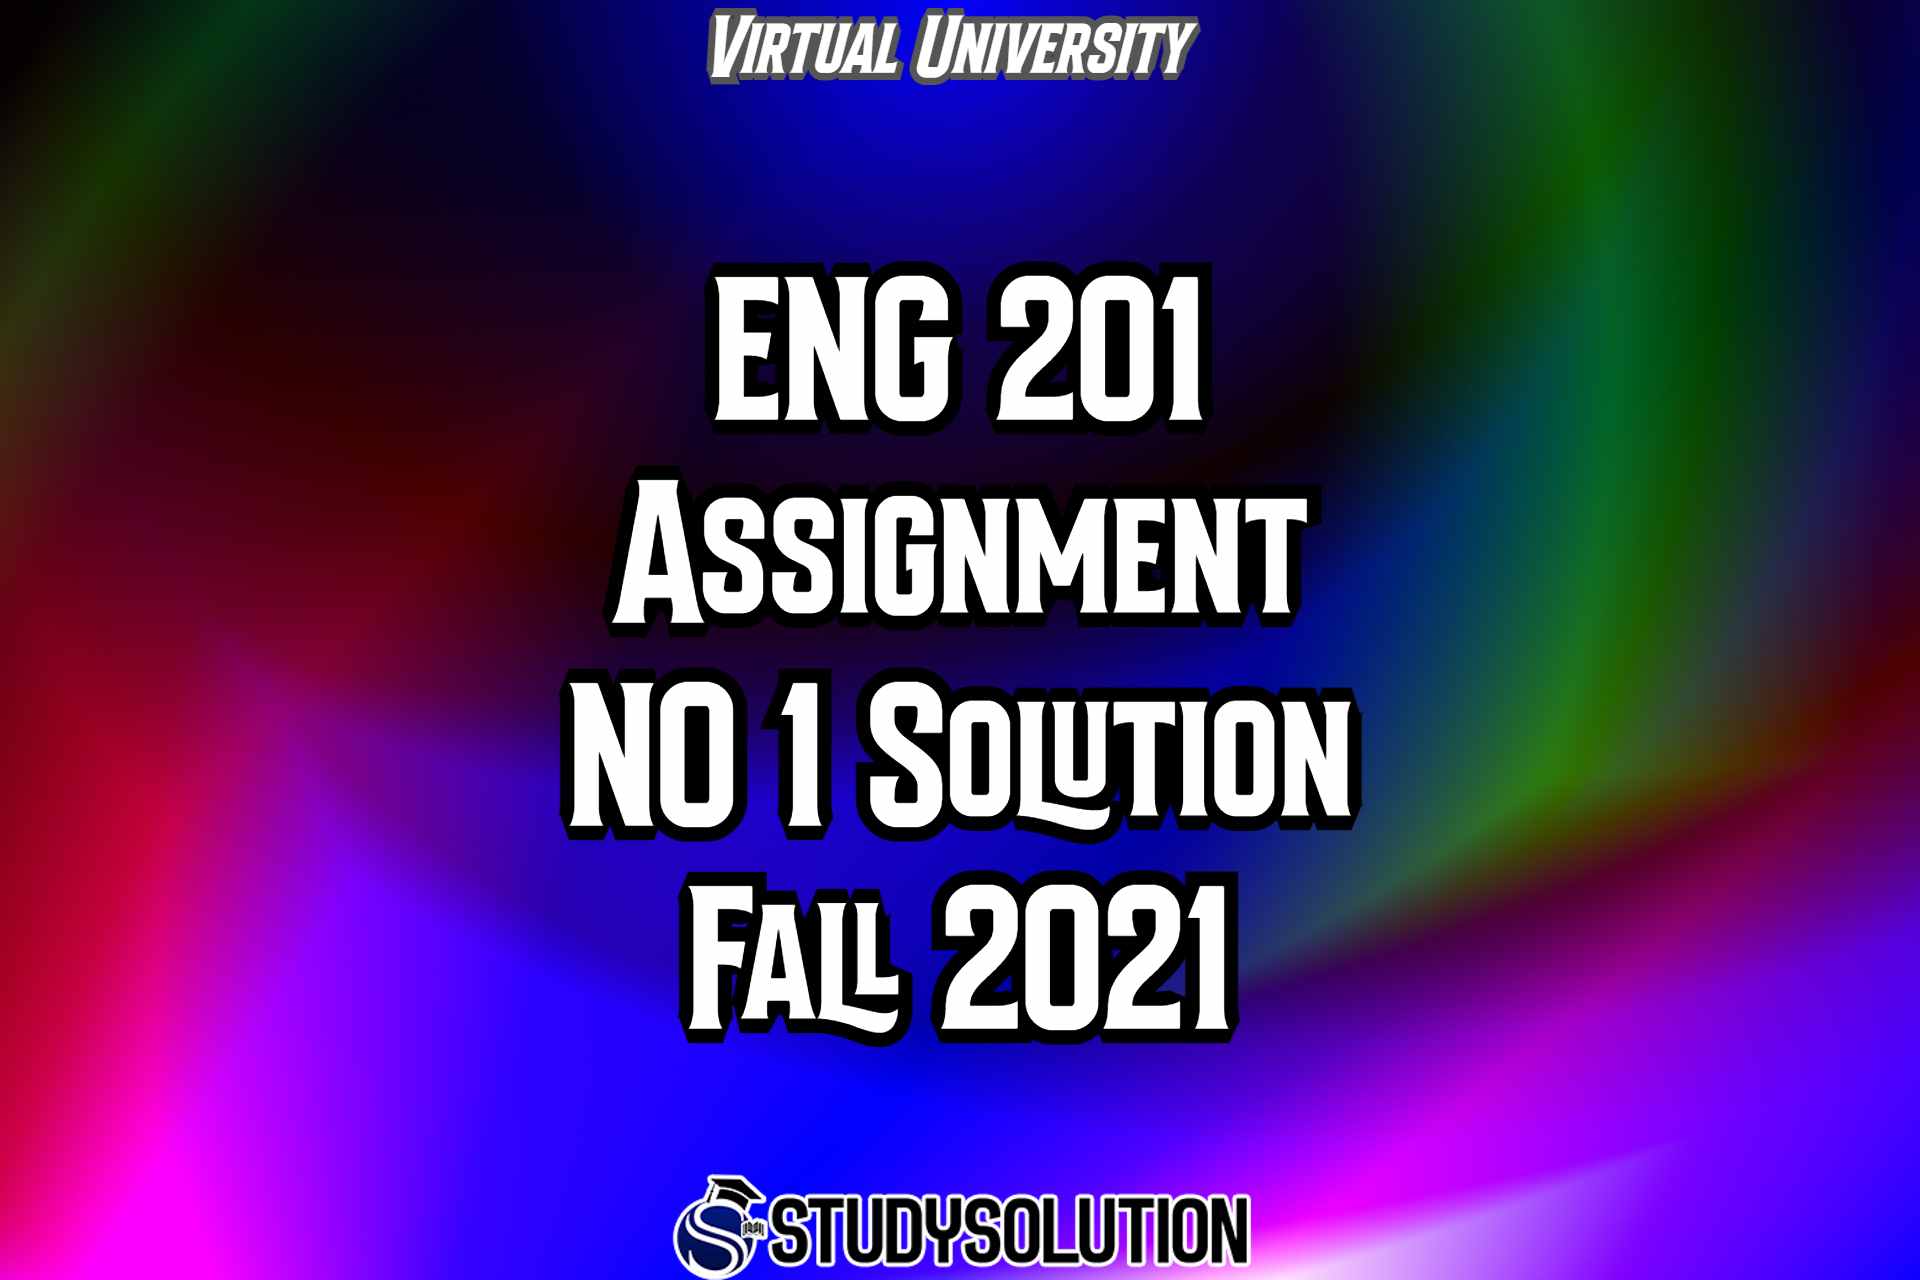 ENG201 Assignment NO 1 Solution Fall 2021